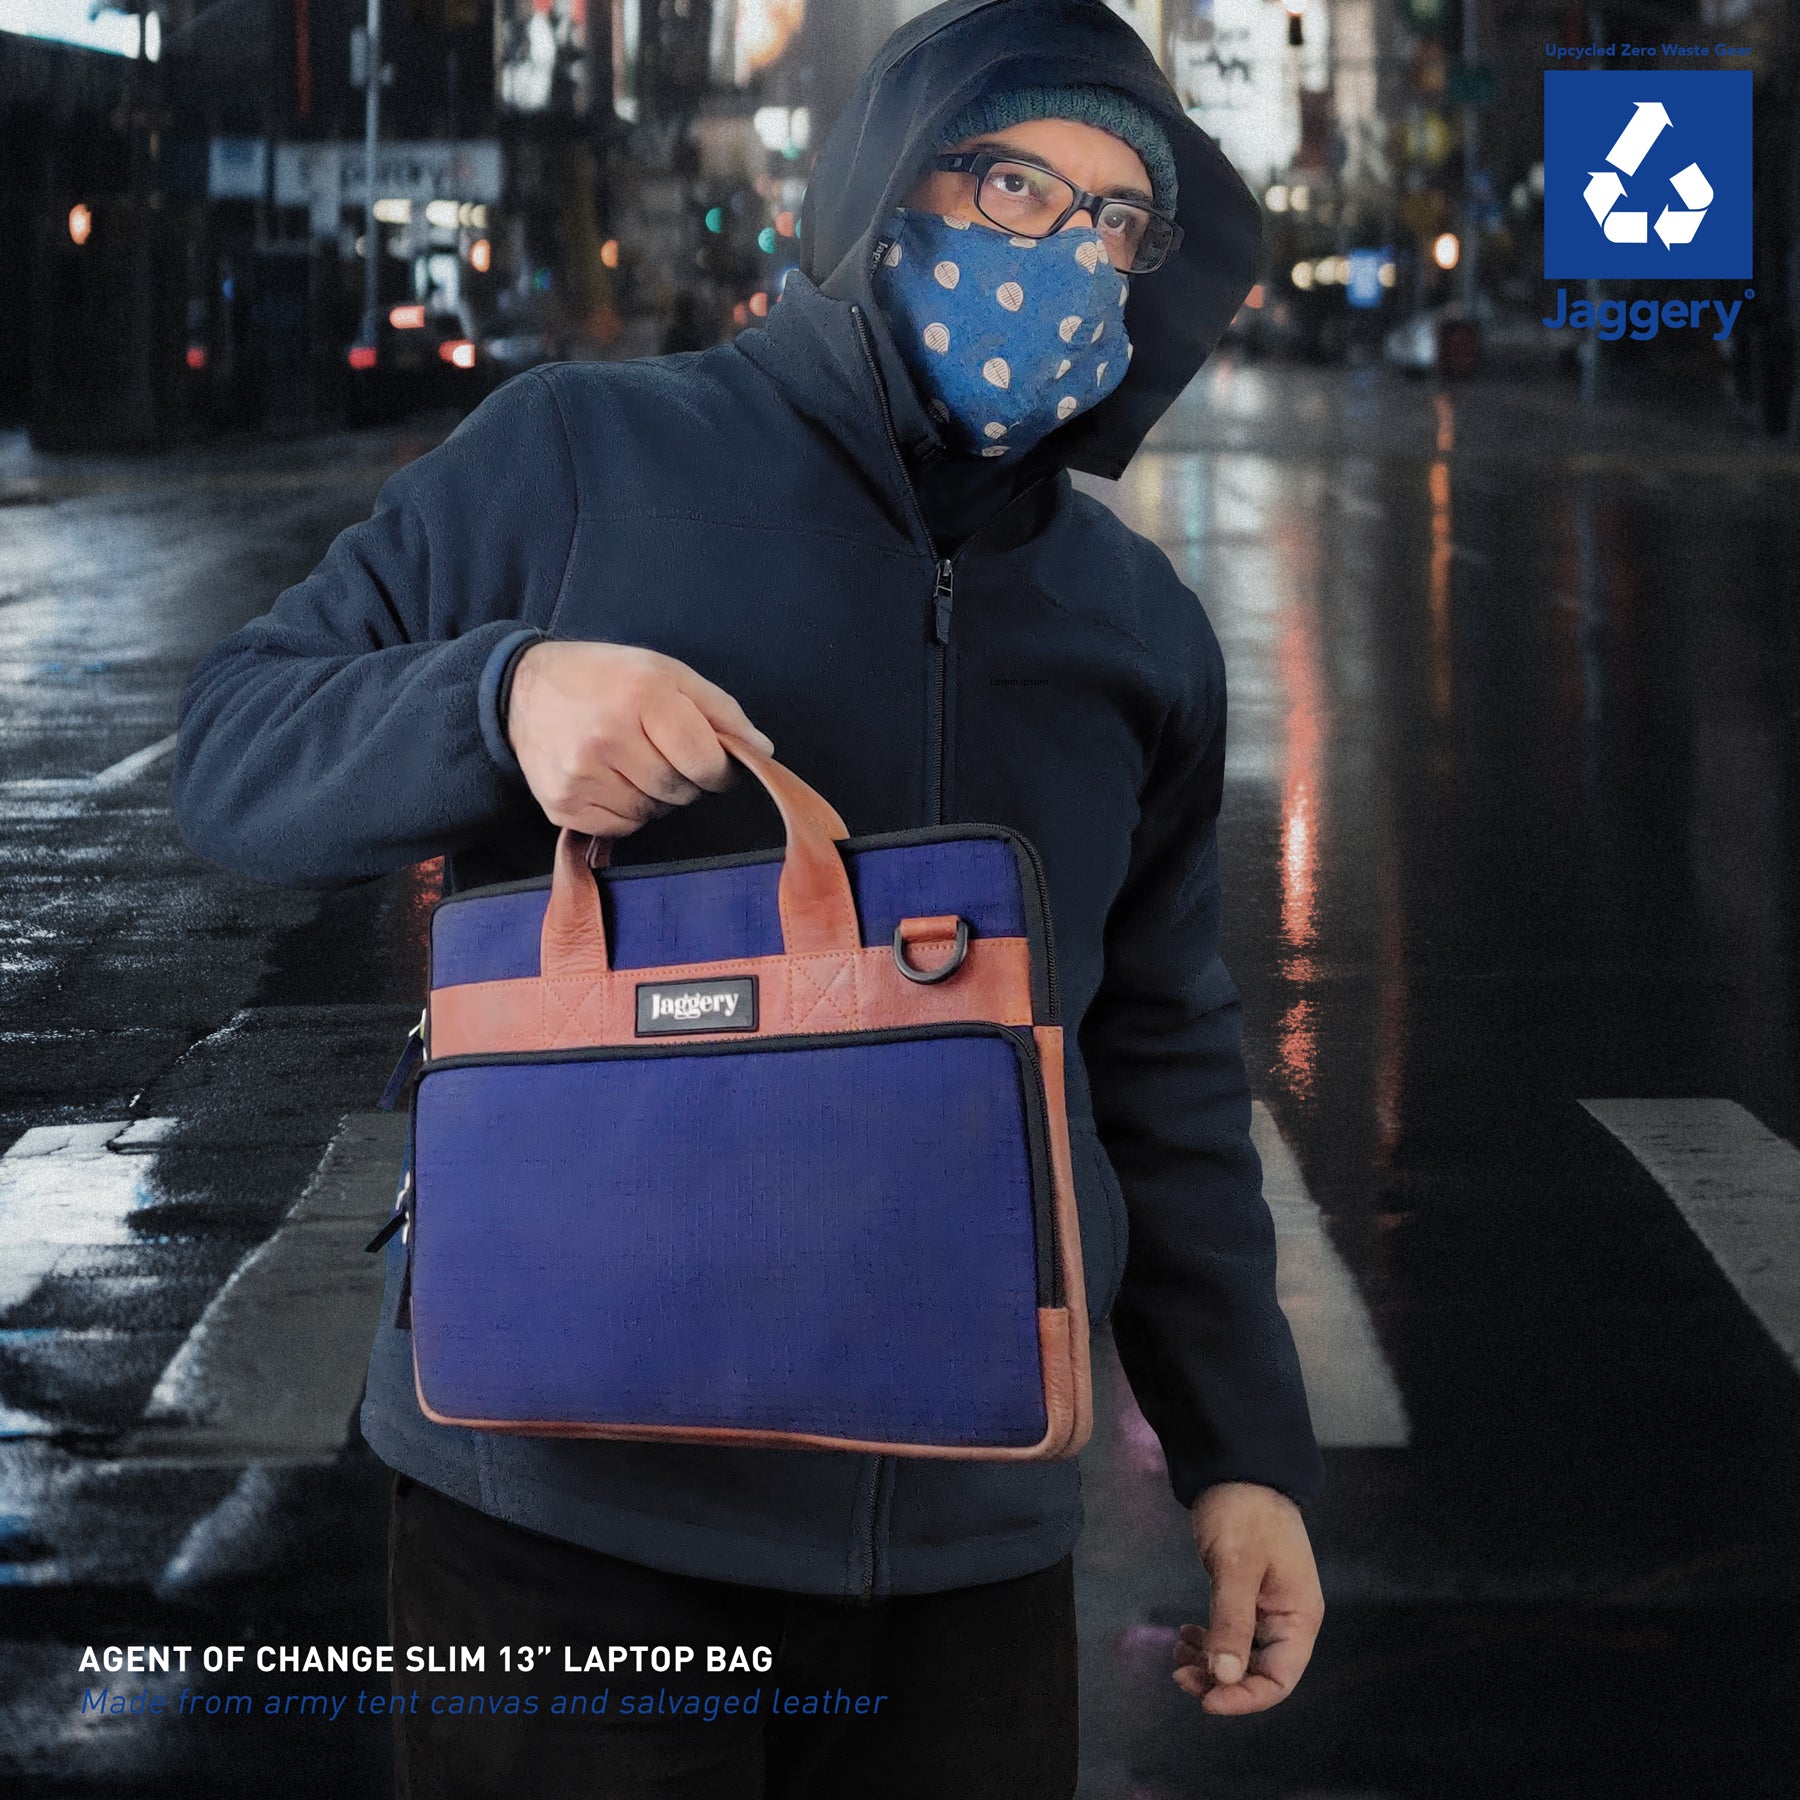 Agent of Change Slim 13" Laptop Bag in Blue Canvas & Salvaged Leather